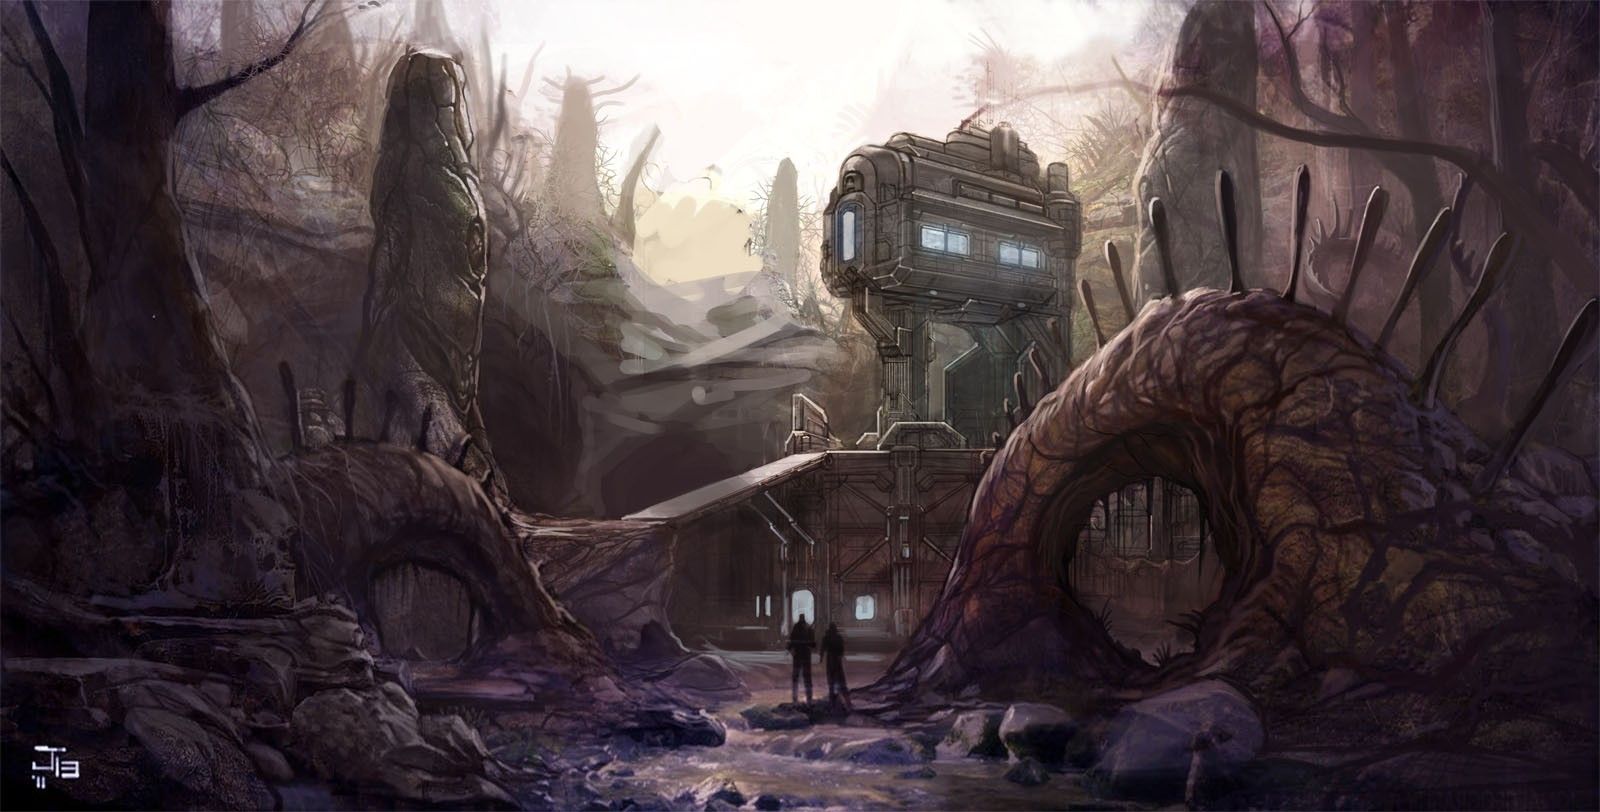 video games, landscapes, trees, Halo, people, Microsoft, digital art, conce...